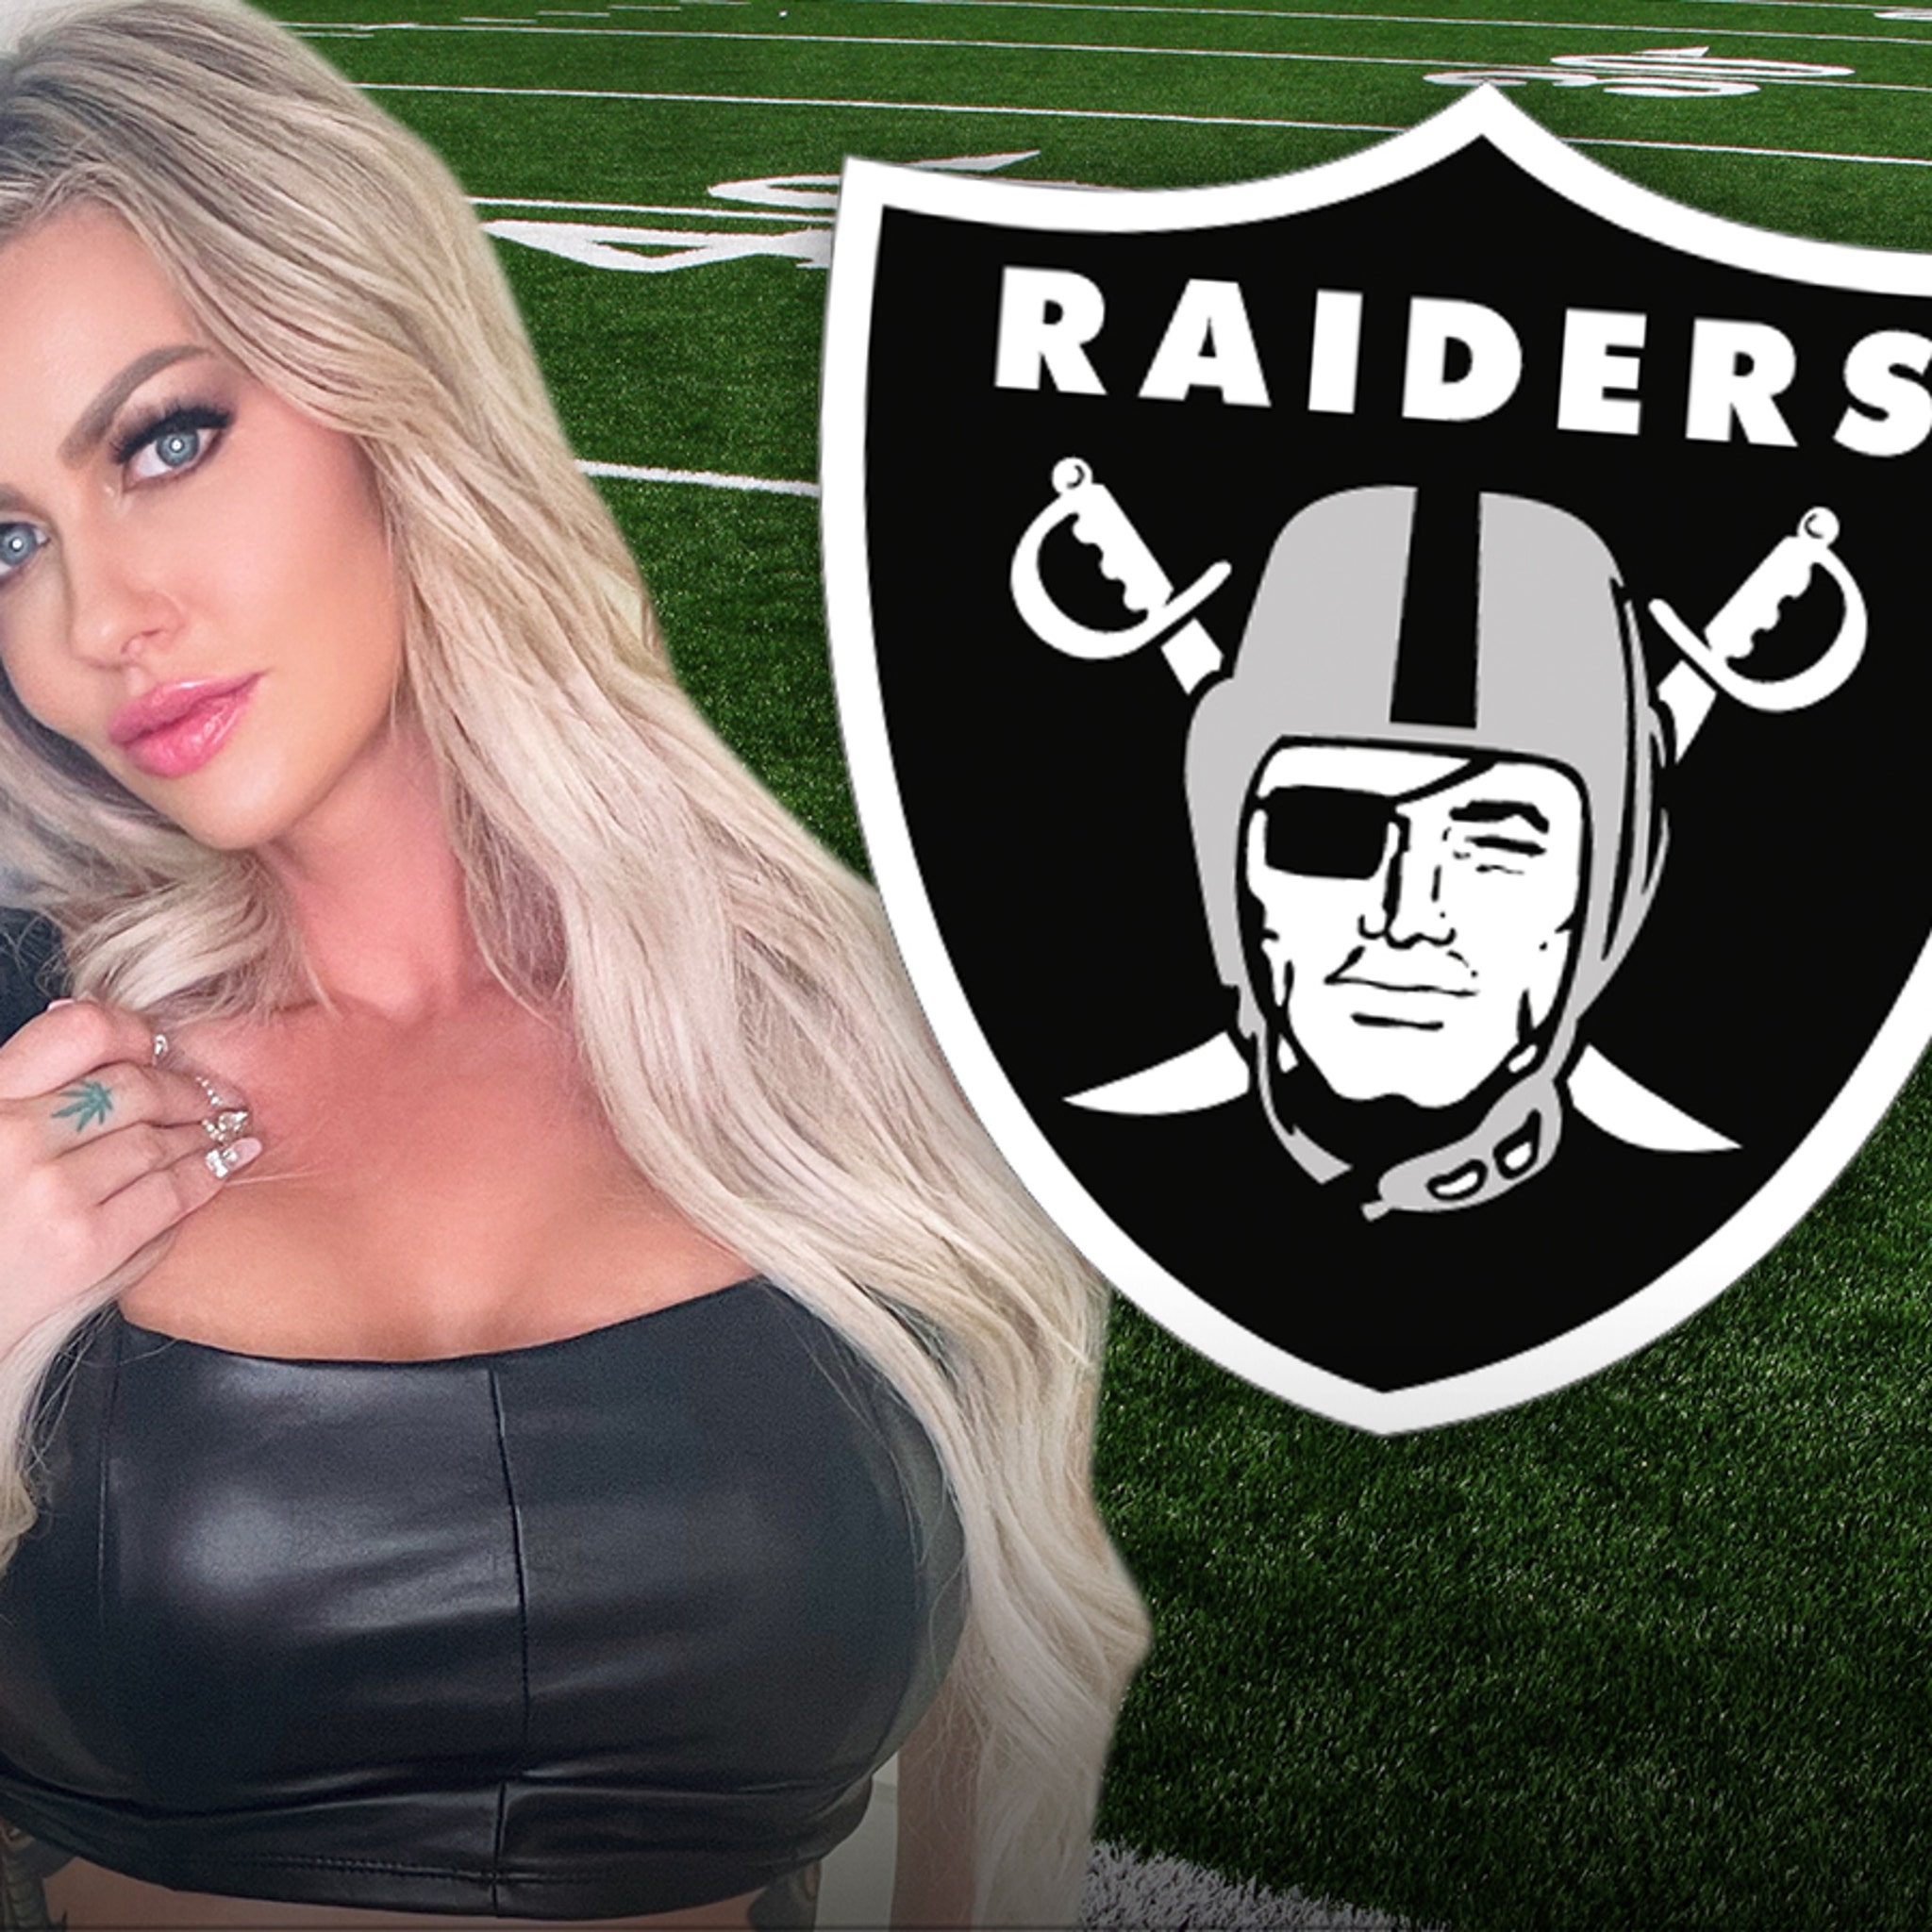 Las Vegas Sex Worker Offering Discount VIP Package To Raiders Players, Staff This Season